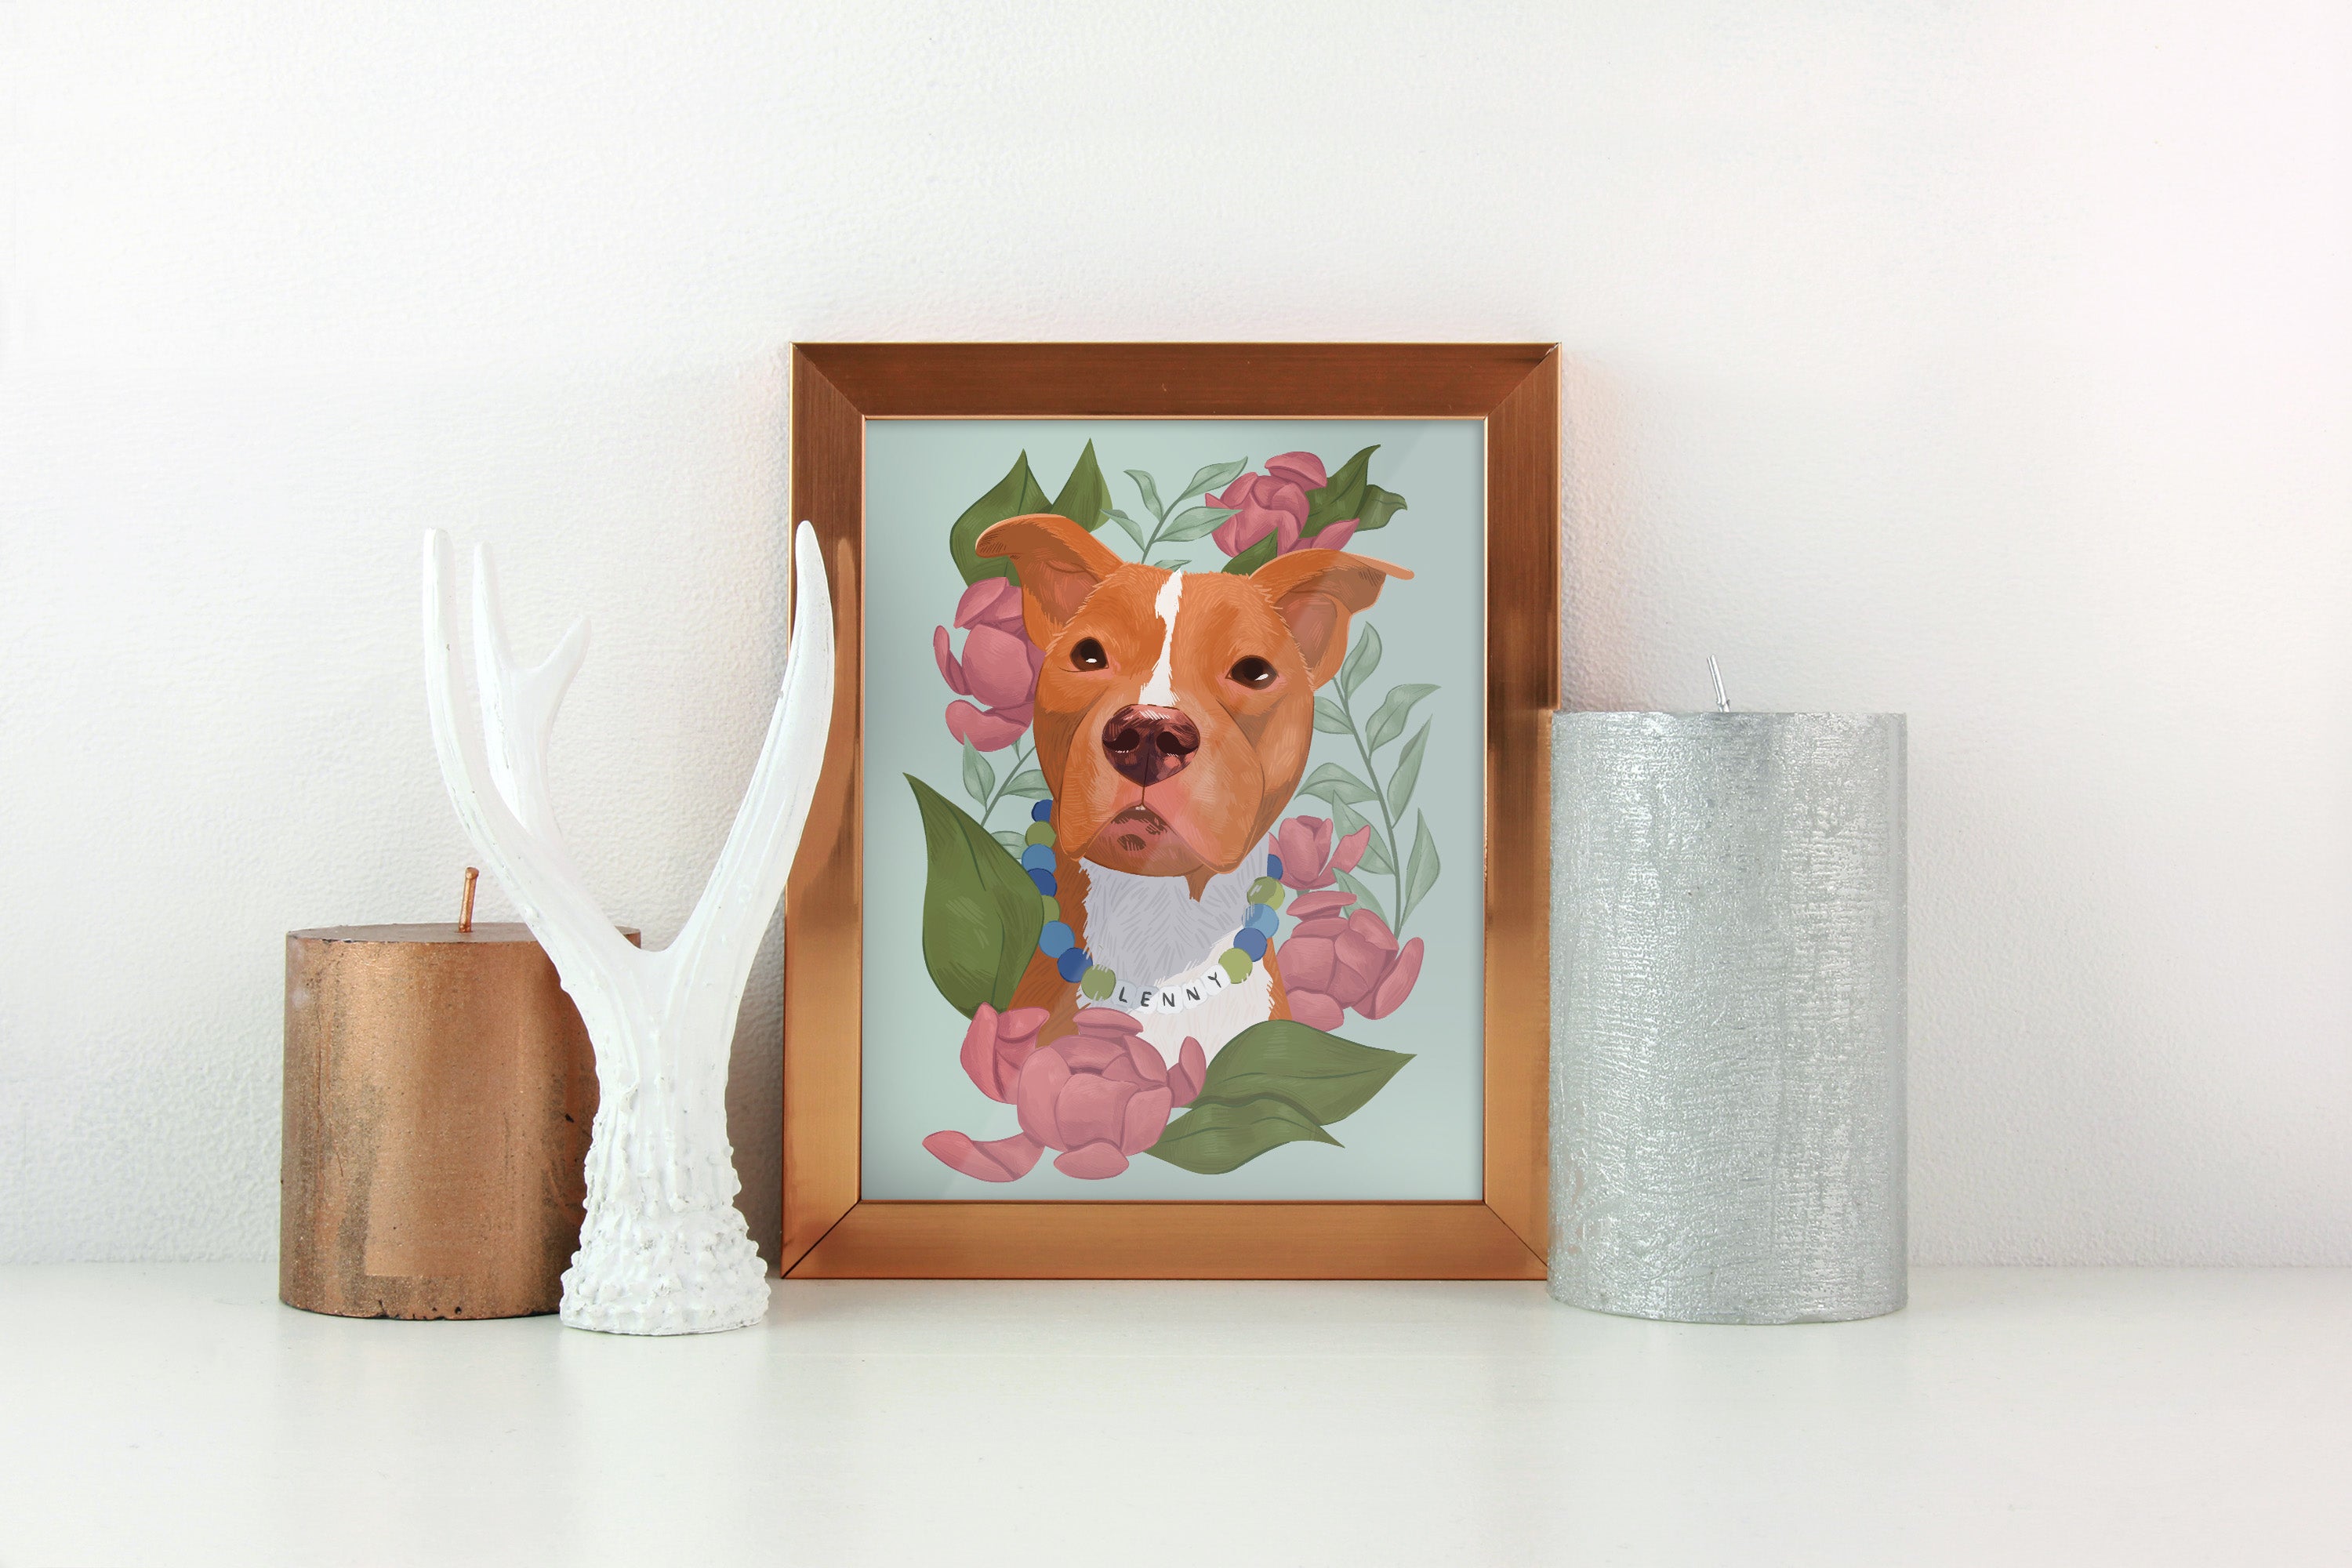 Hand-drawn potrait of a brown and white Pitbull with a floral bakground